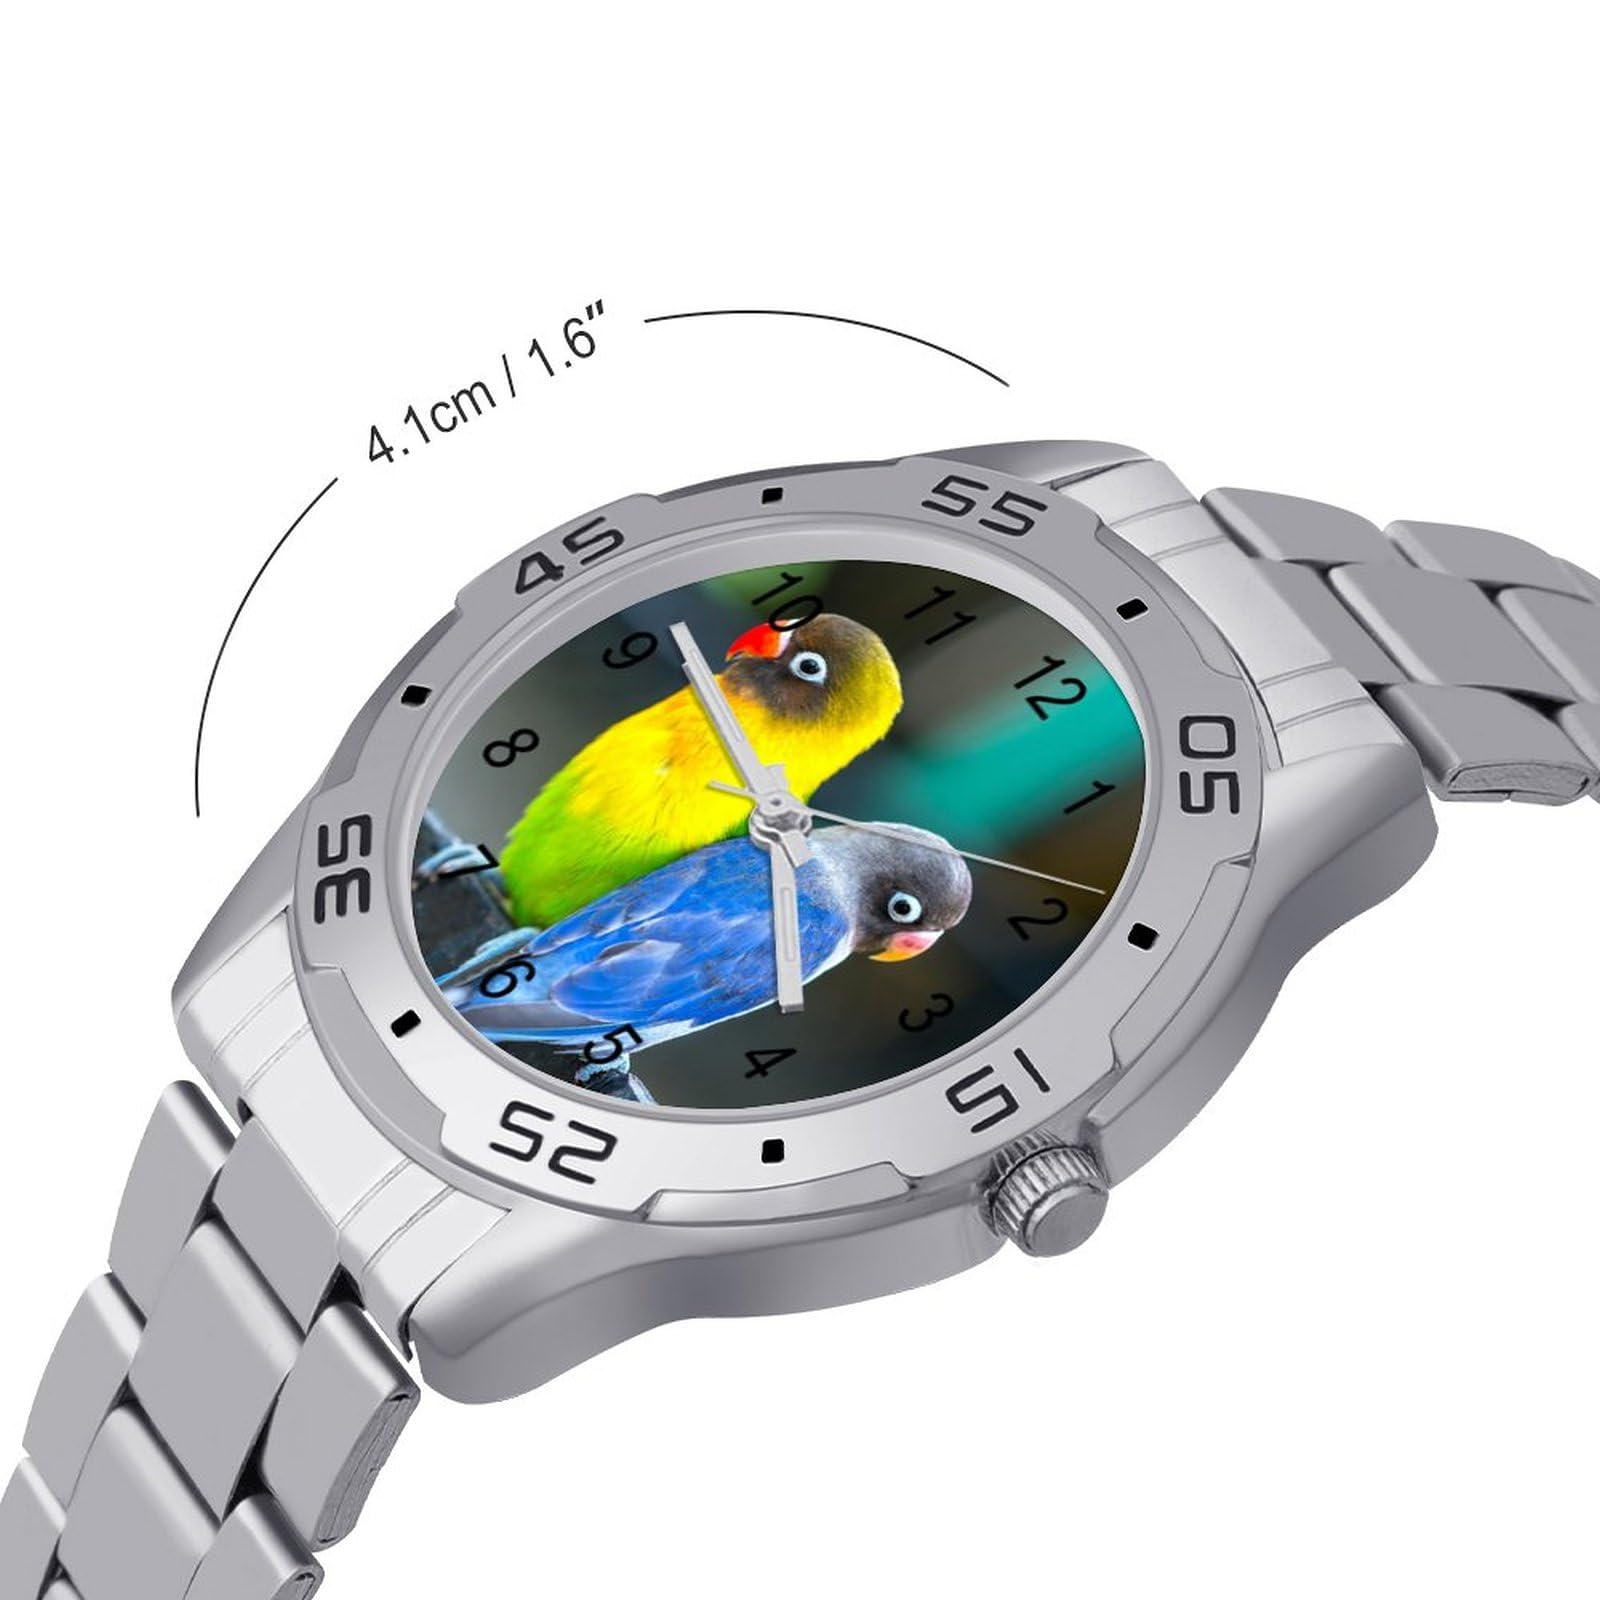 Love Birds Parrots Sitting Together Stainless Steel Band Business Watch Dress Wrist Unique Luxury Work Casual Waterproof Watches